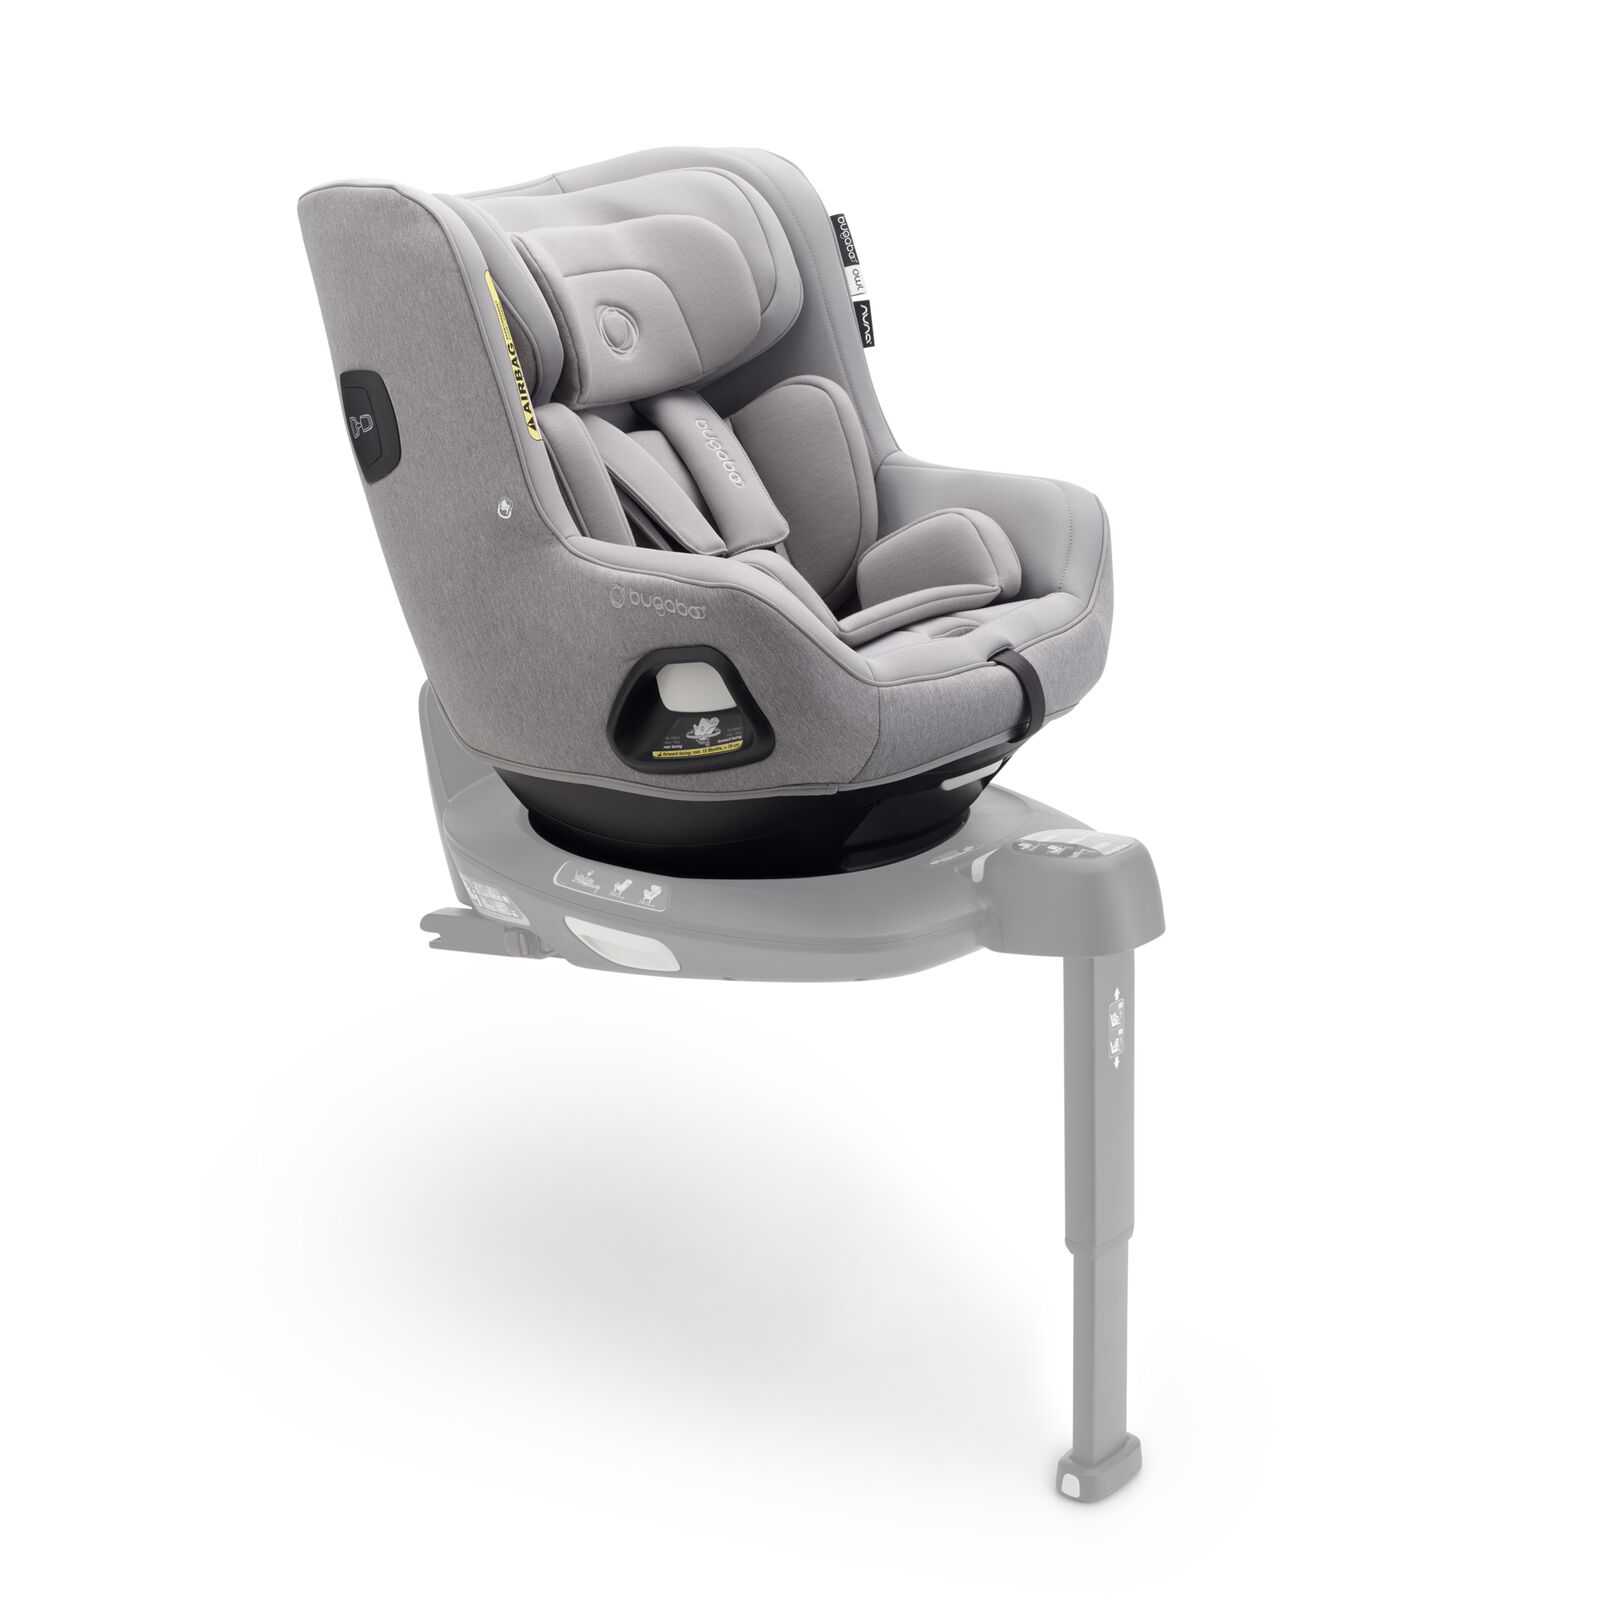 Bugaboo Owl by Nuna car seat in grey fabrics on the 360 ISOFIX Base, with stability leg extended. Text reads: i-Size approved.